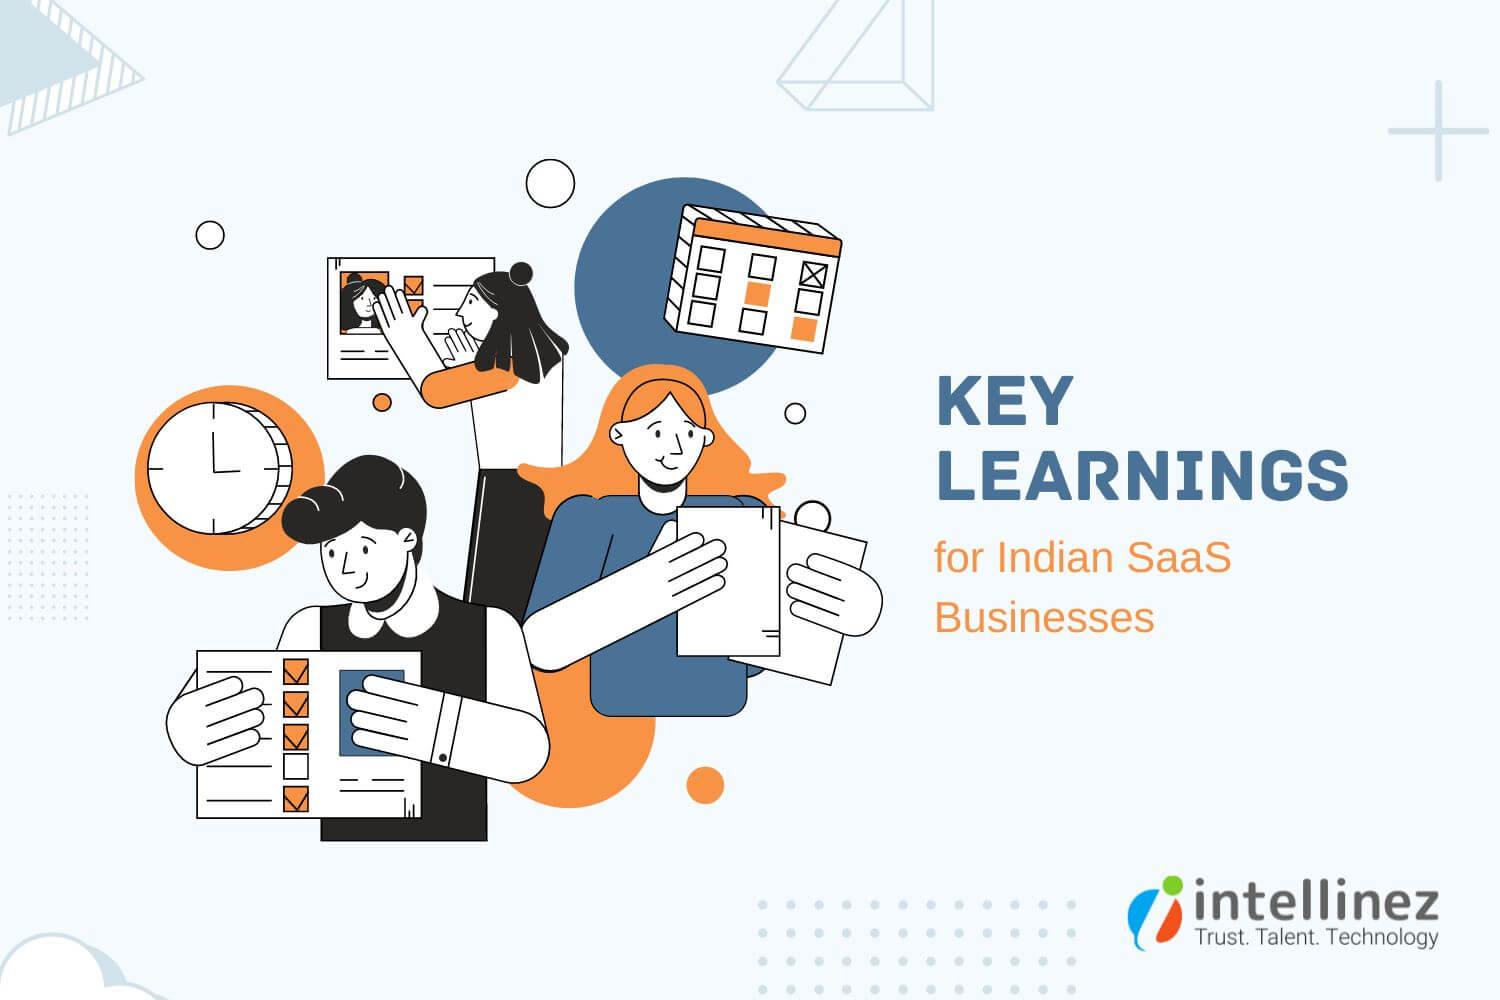 Key Learnings for Indian SaaS Businesses